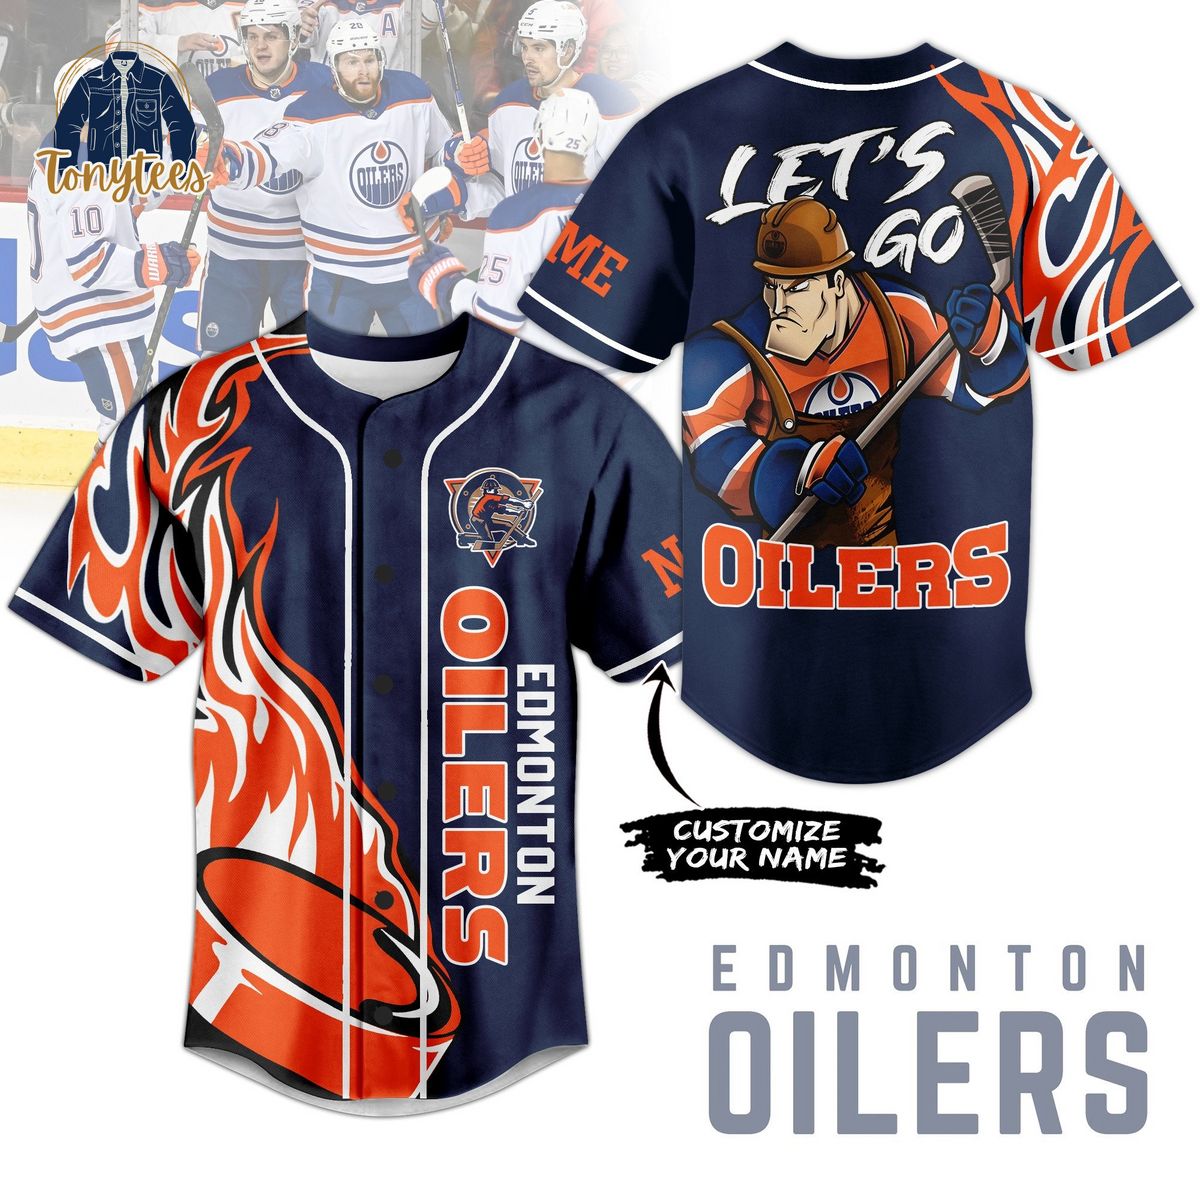 Personalized Edmonton Oilers Let’s Go Oilers Baseball Jersey